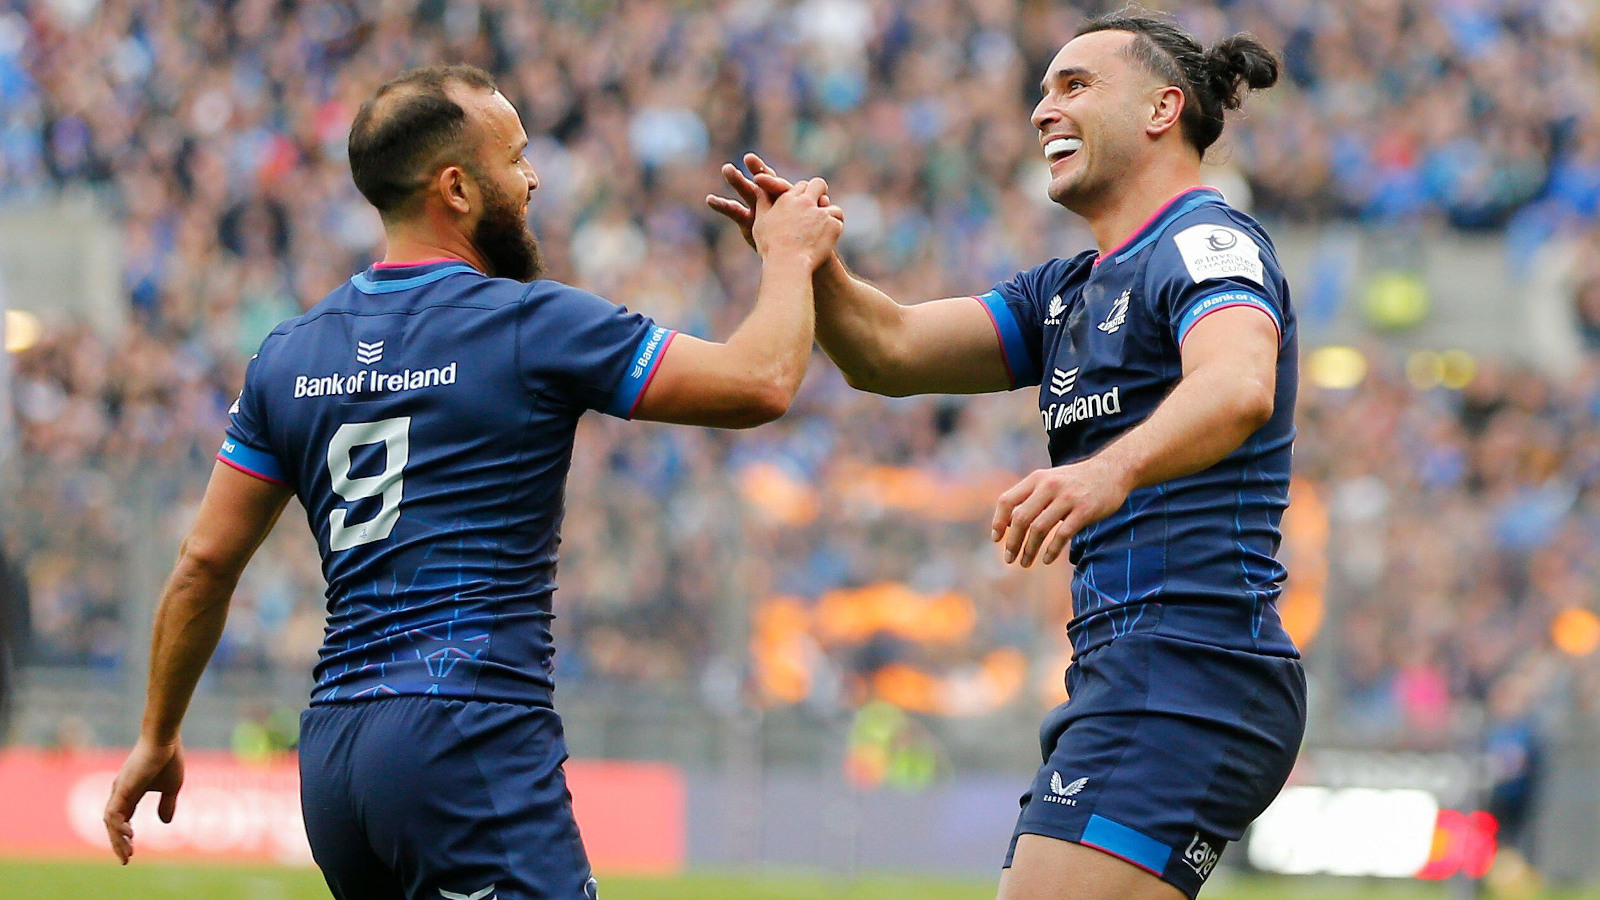 leinster v northampton saints: five takeaways from the champions cup clash as vintage jamison gibson-park gets better with age